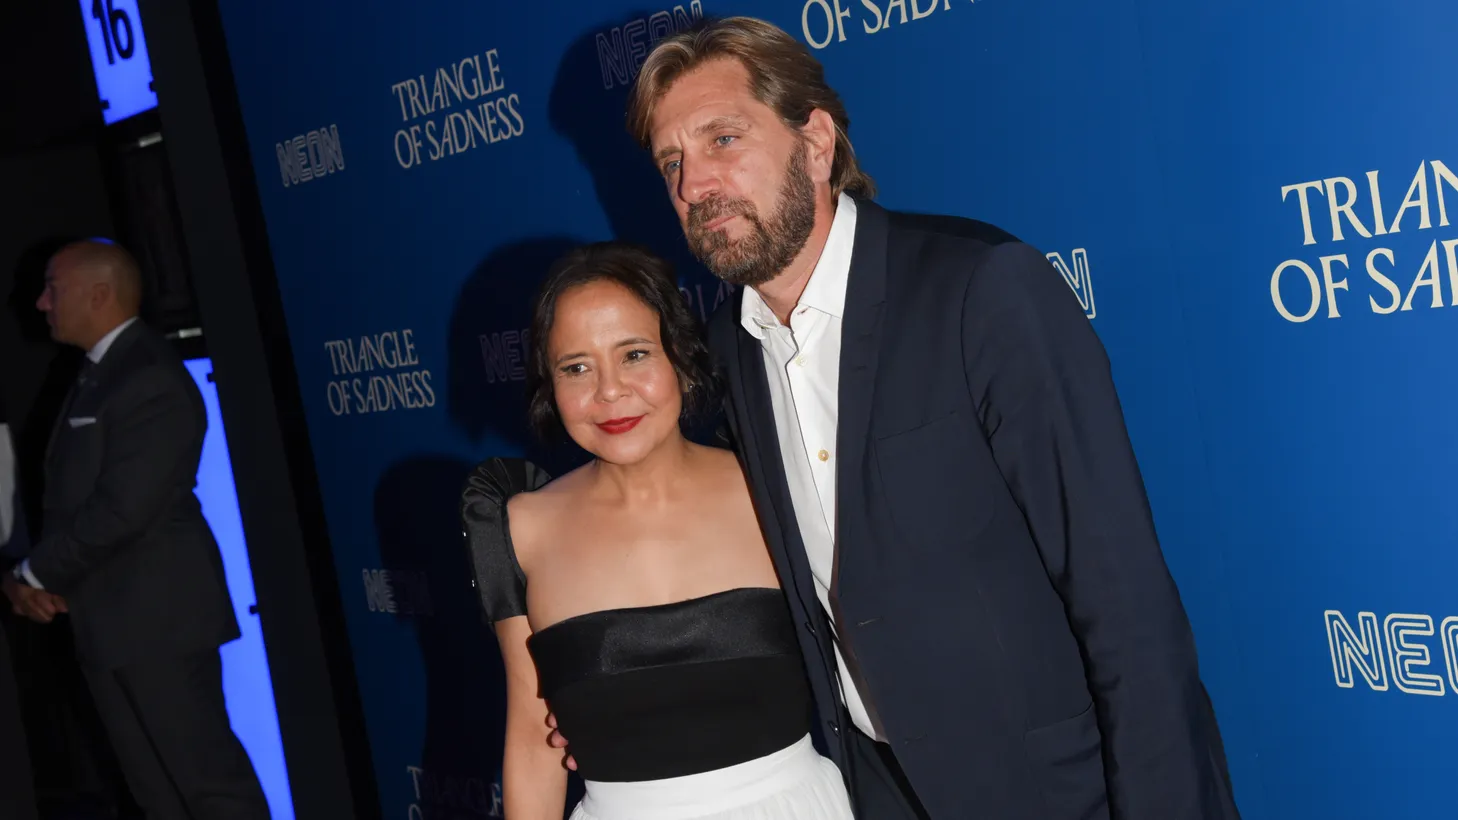 Actor Dolly De Leon and director Ruben Östlund attend the “Triangle of Sadness” screening at Regal Union Square in New York, on October 3, 2022.